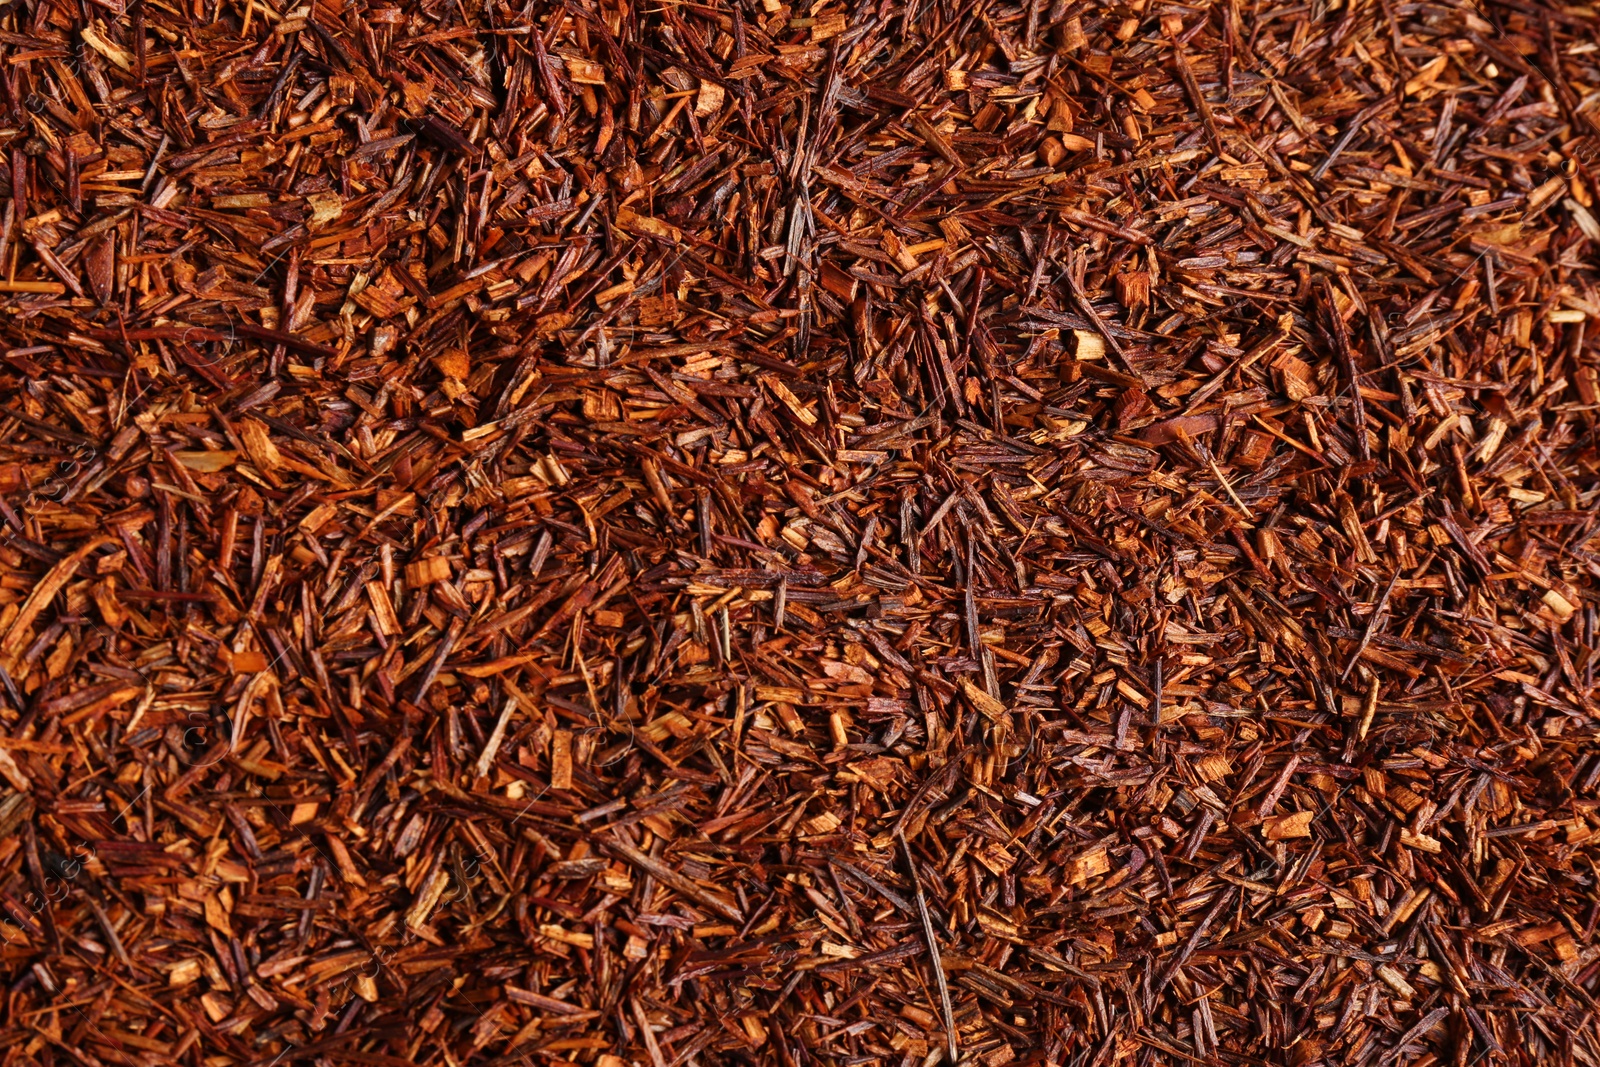 Photo of Heap of dry rooibos tea leaves as background, top view